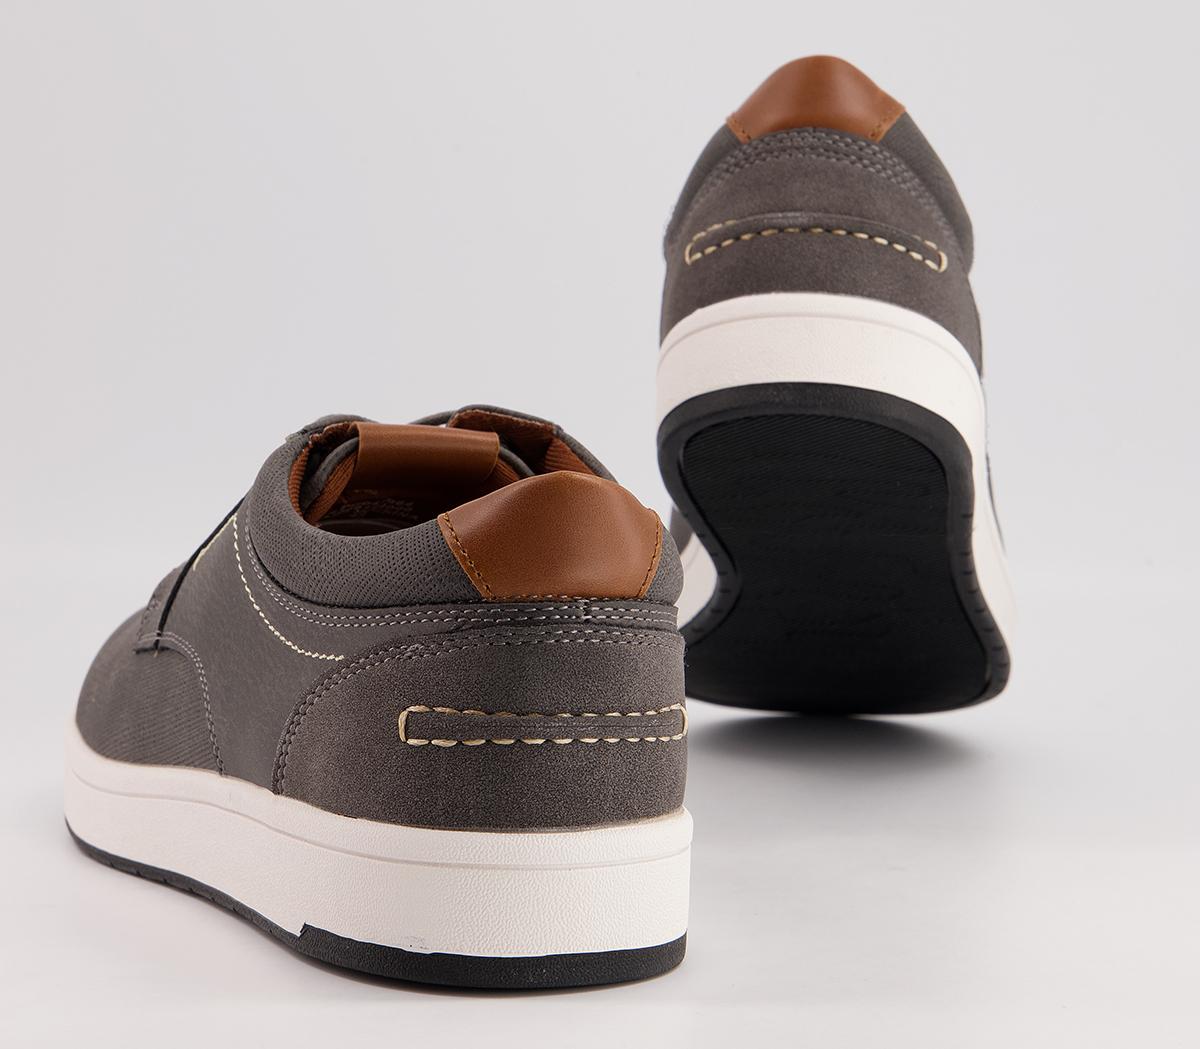 OFFICE Clifton Smart Casual Trainers Grey - Men's Casual Shoes